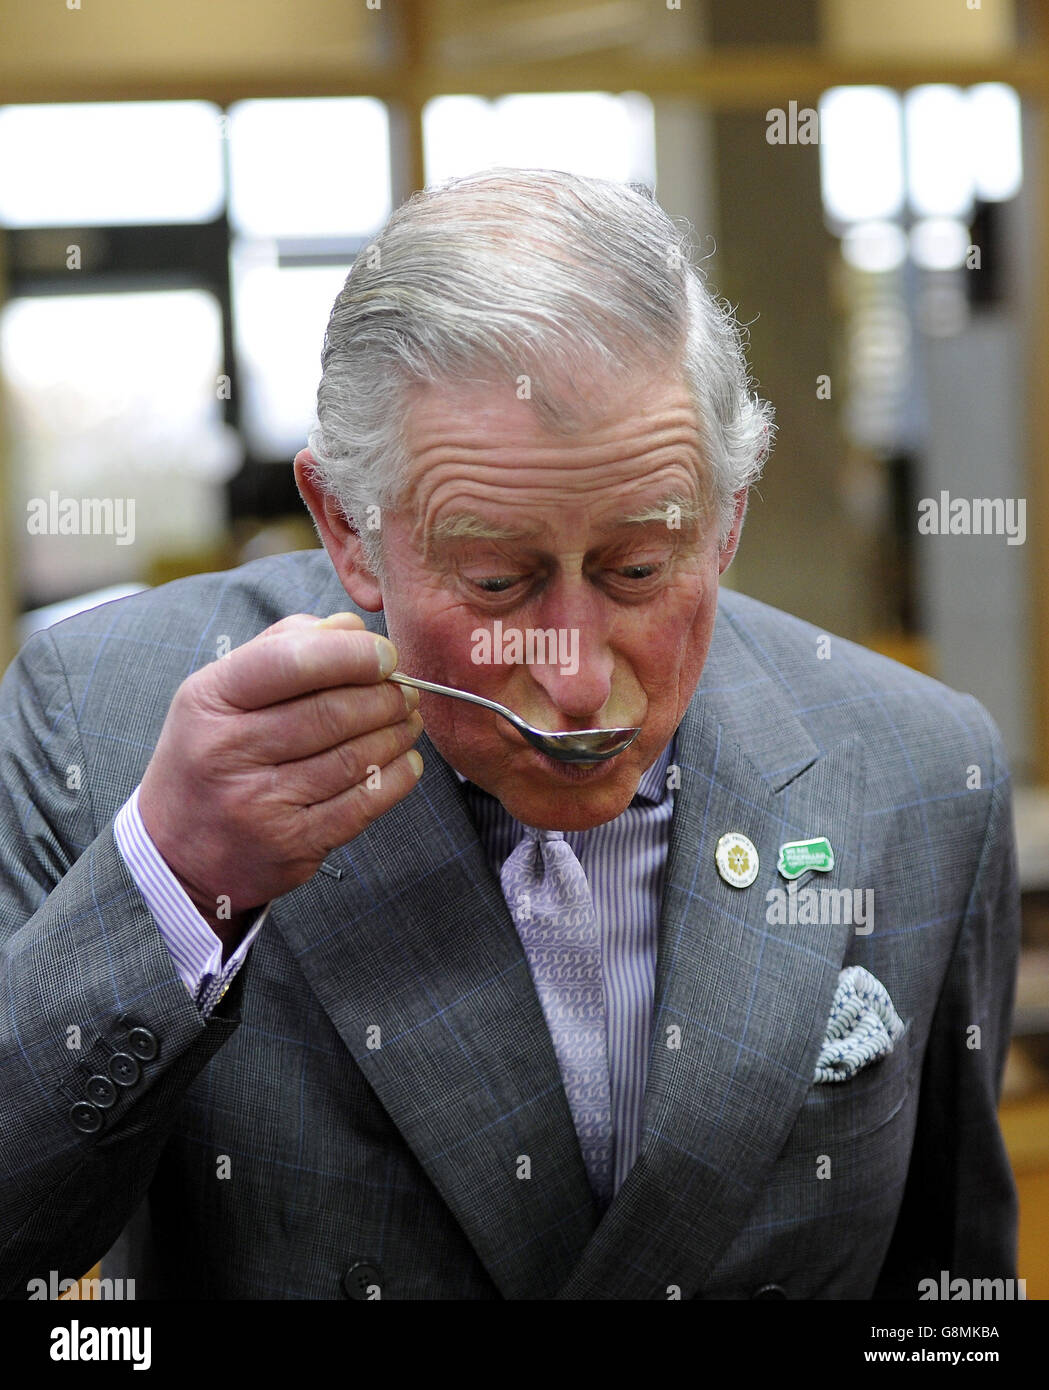 The Prince of Wales takes part in a tea tasting during his visit to the tasting rooms and cookery school at Taylors of Harrogate as part of his tour of the area. Stock Photo